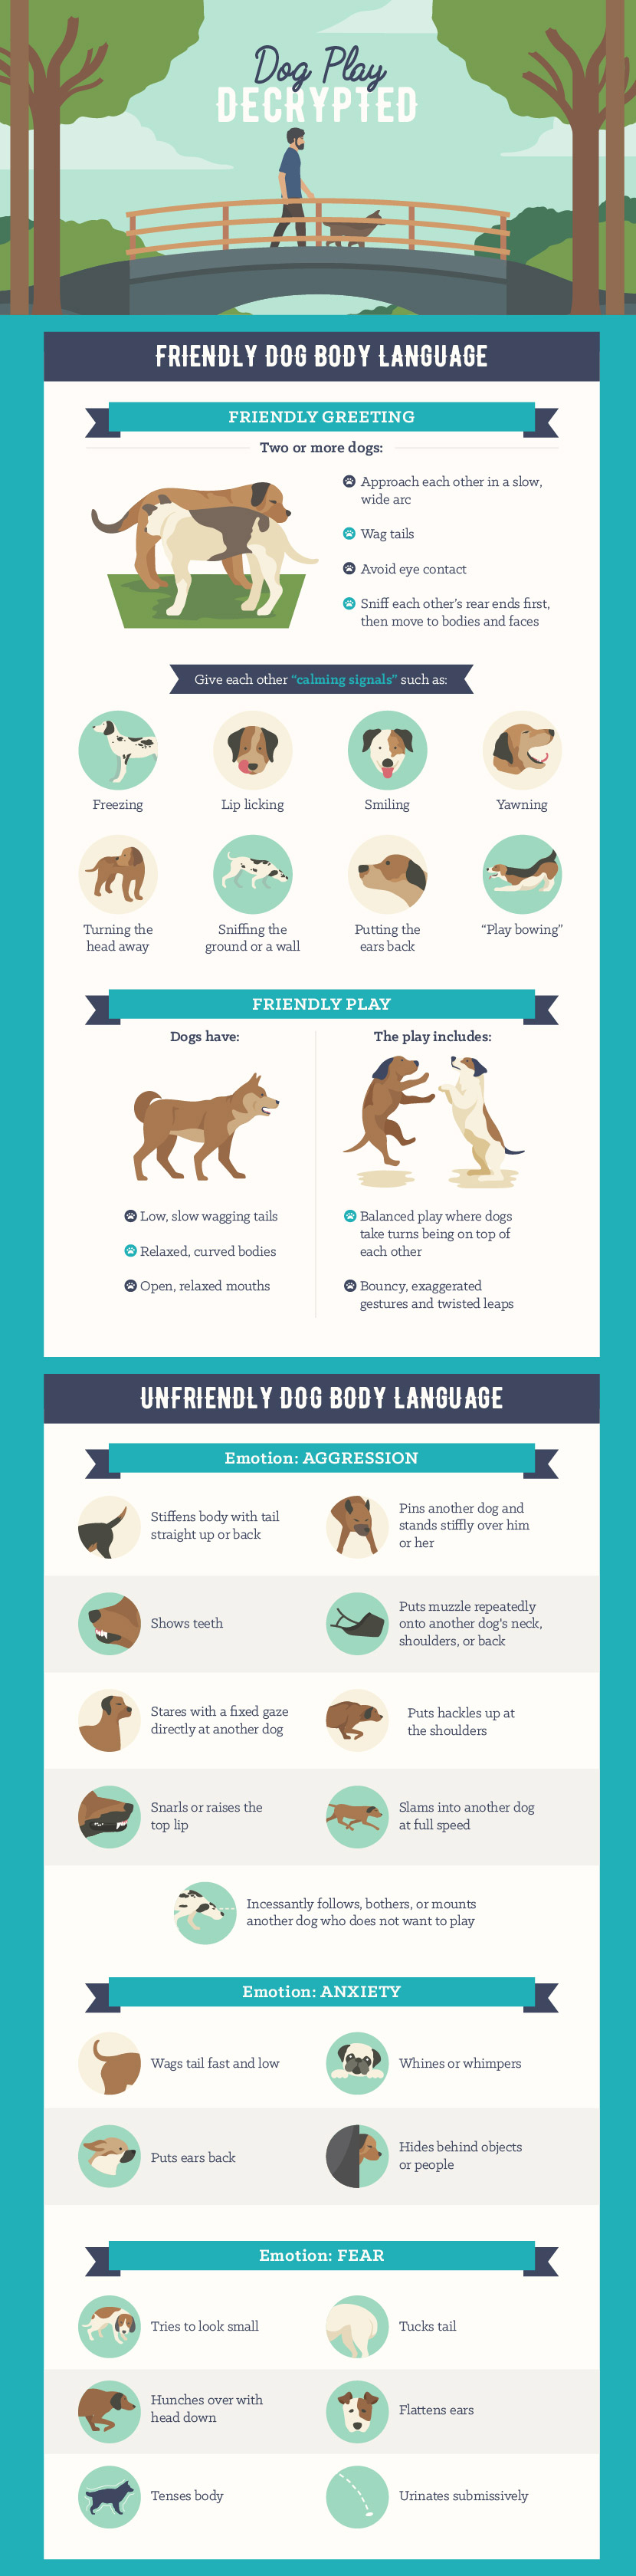 How to Understand Dog Play